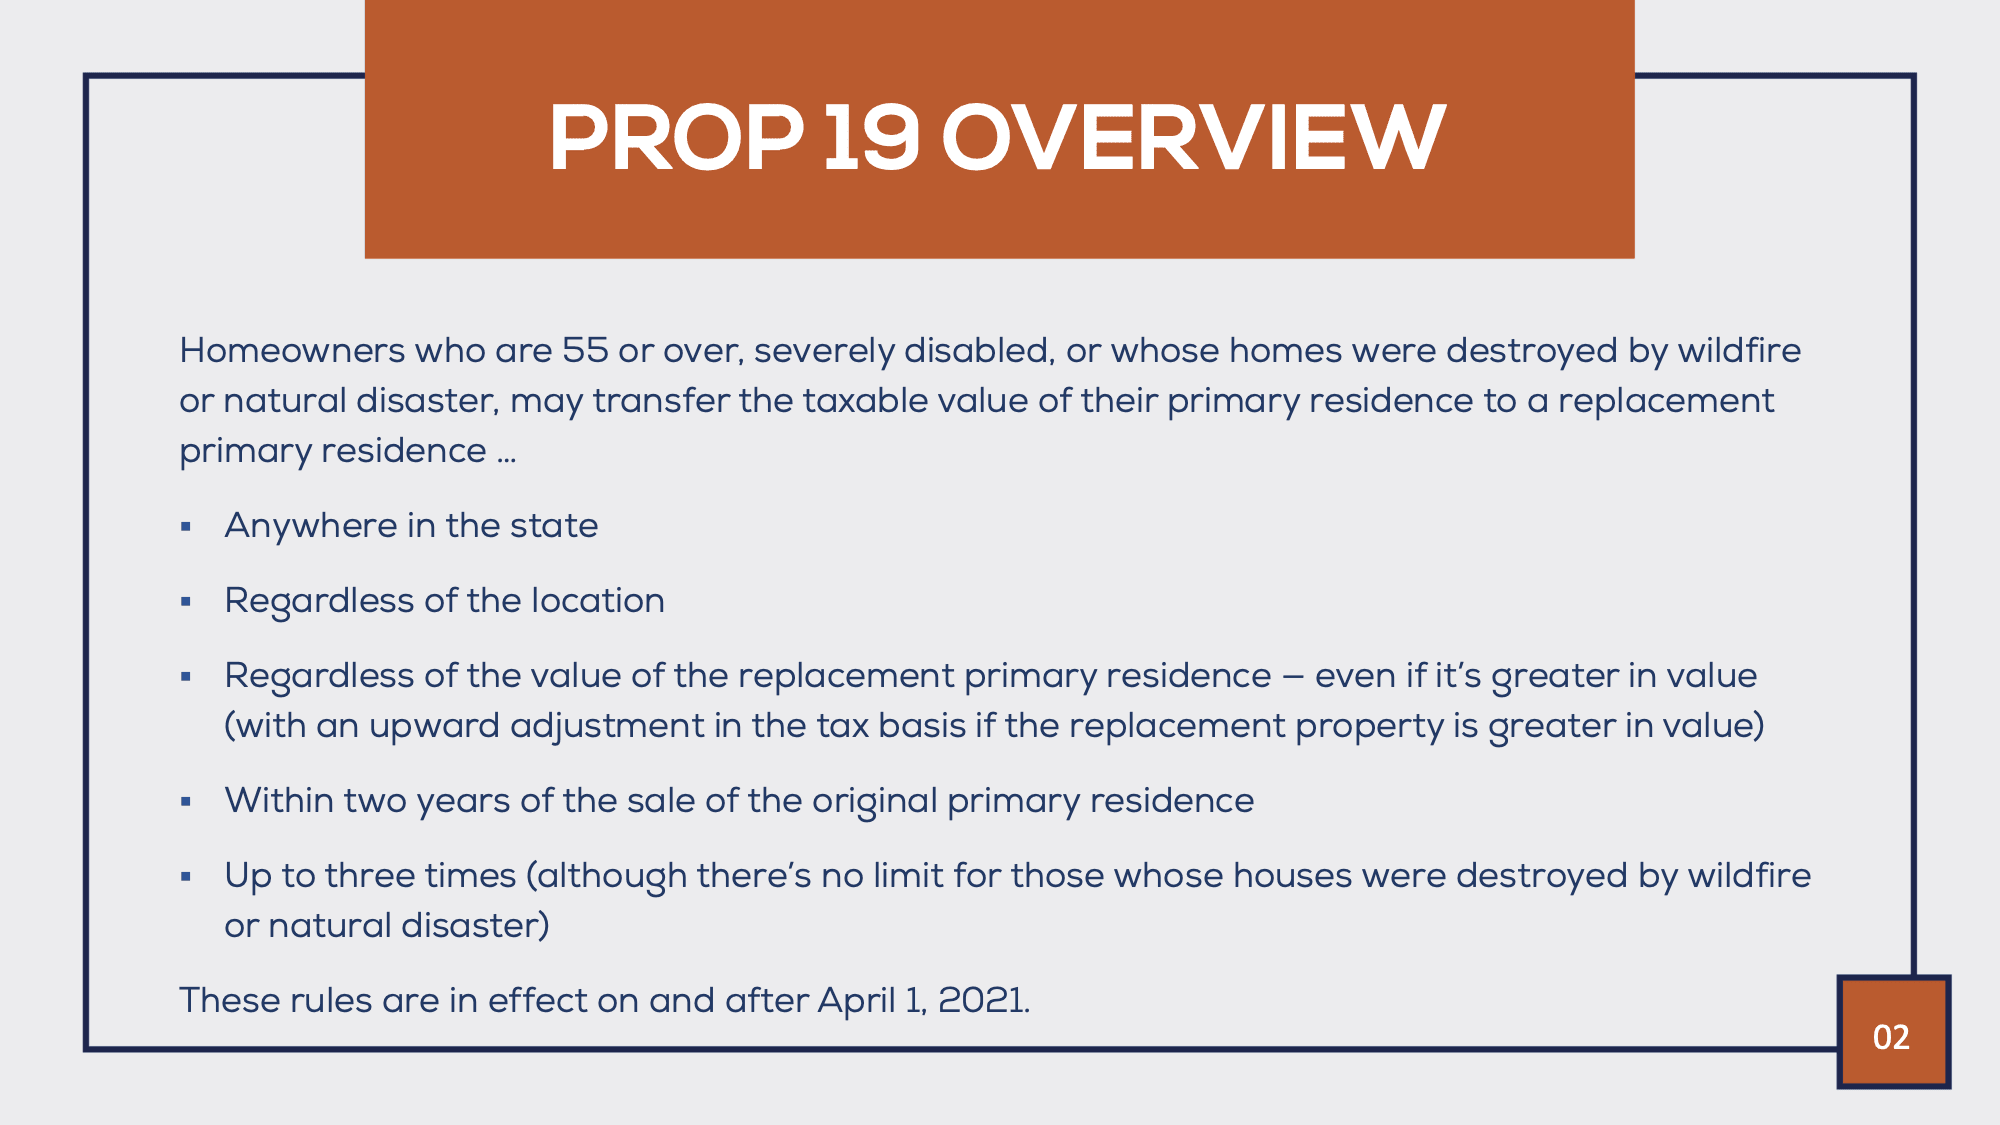 Proposition 19 Overview